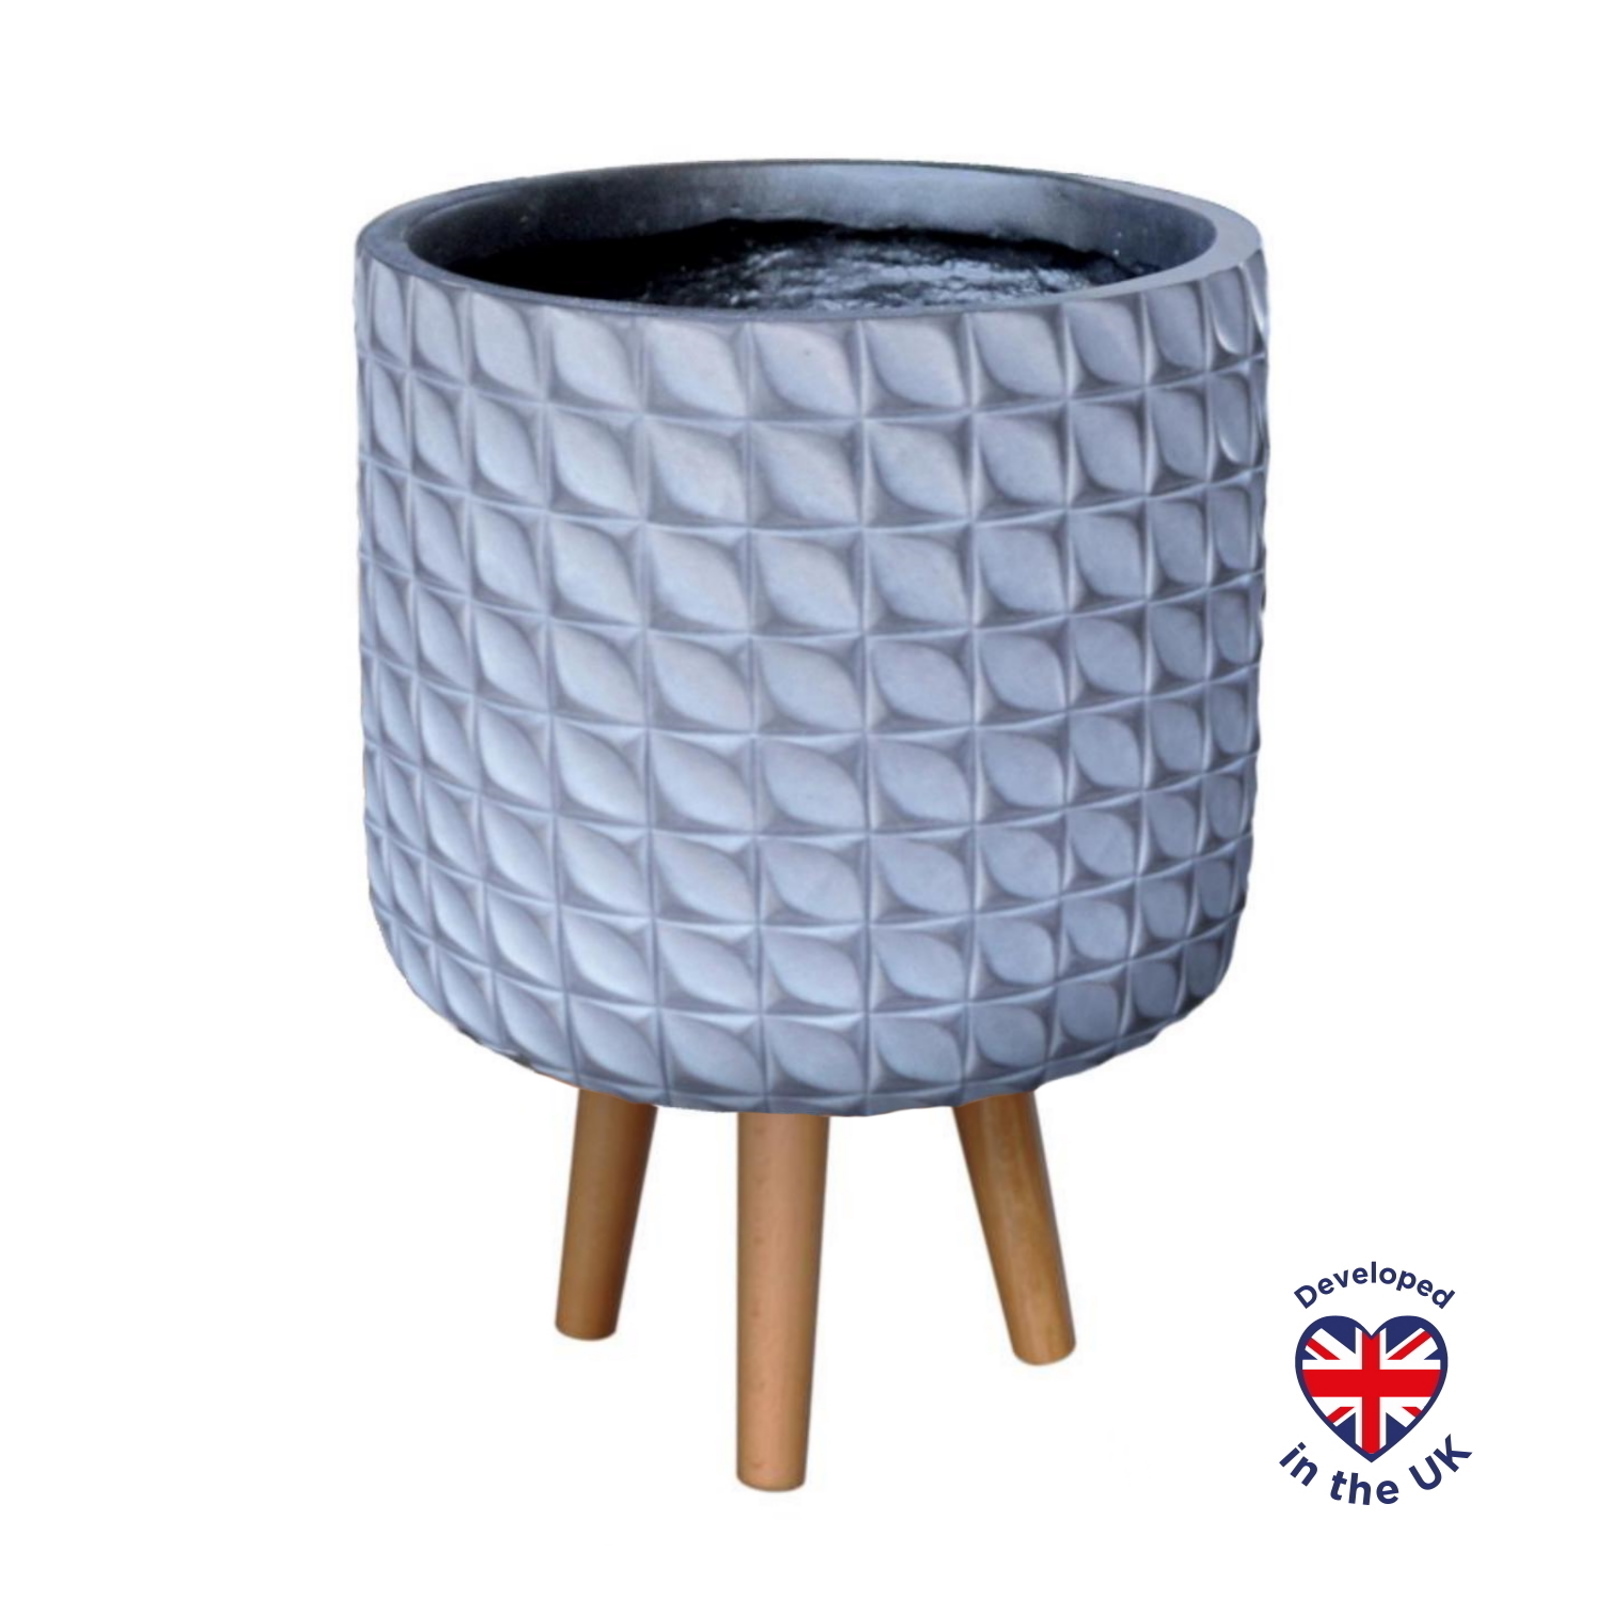 Geometric Patterned Grey Cylinder Indoor Planter with Legs D31 H44 cm, 17.8 ltrs Cap.